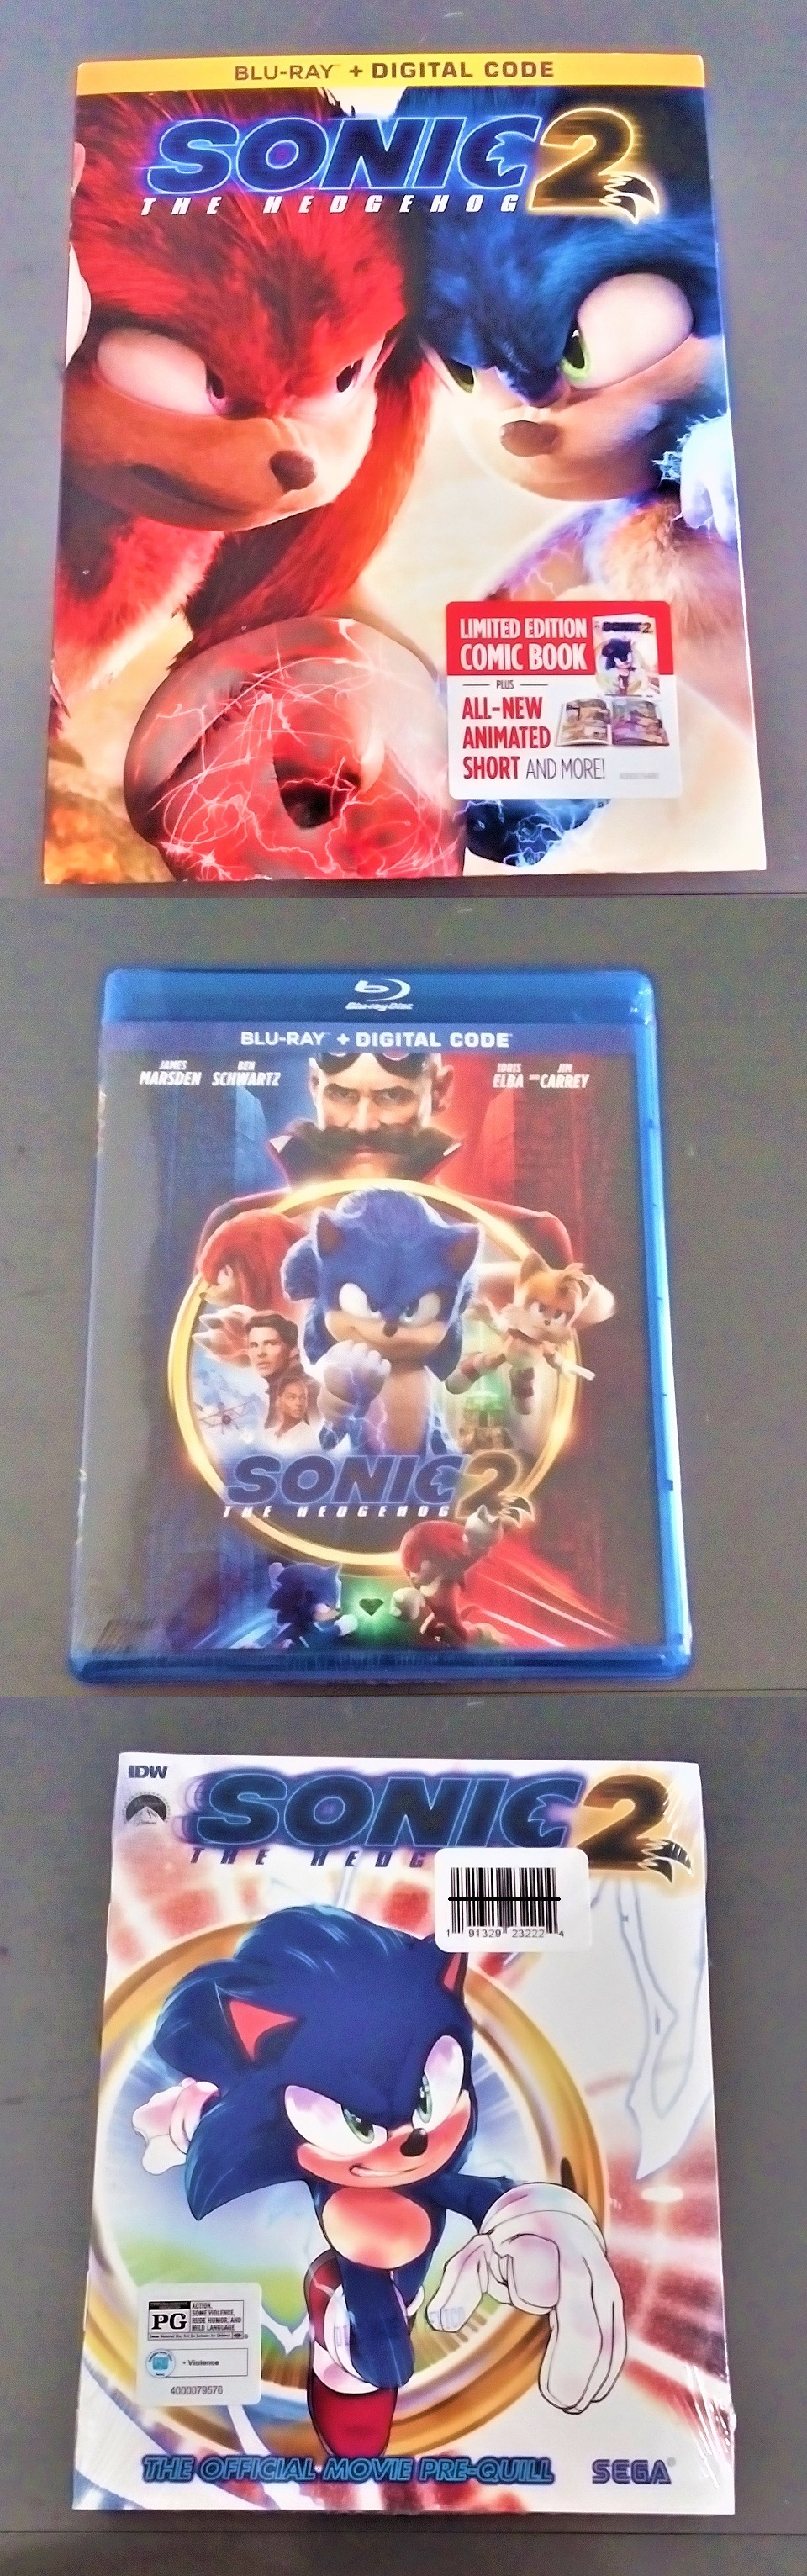 Sonic the Hedgehog 2 Movie Collection (Blu-Ray, Digital Code)James